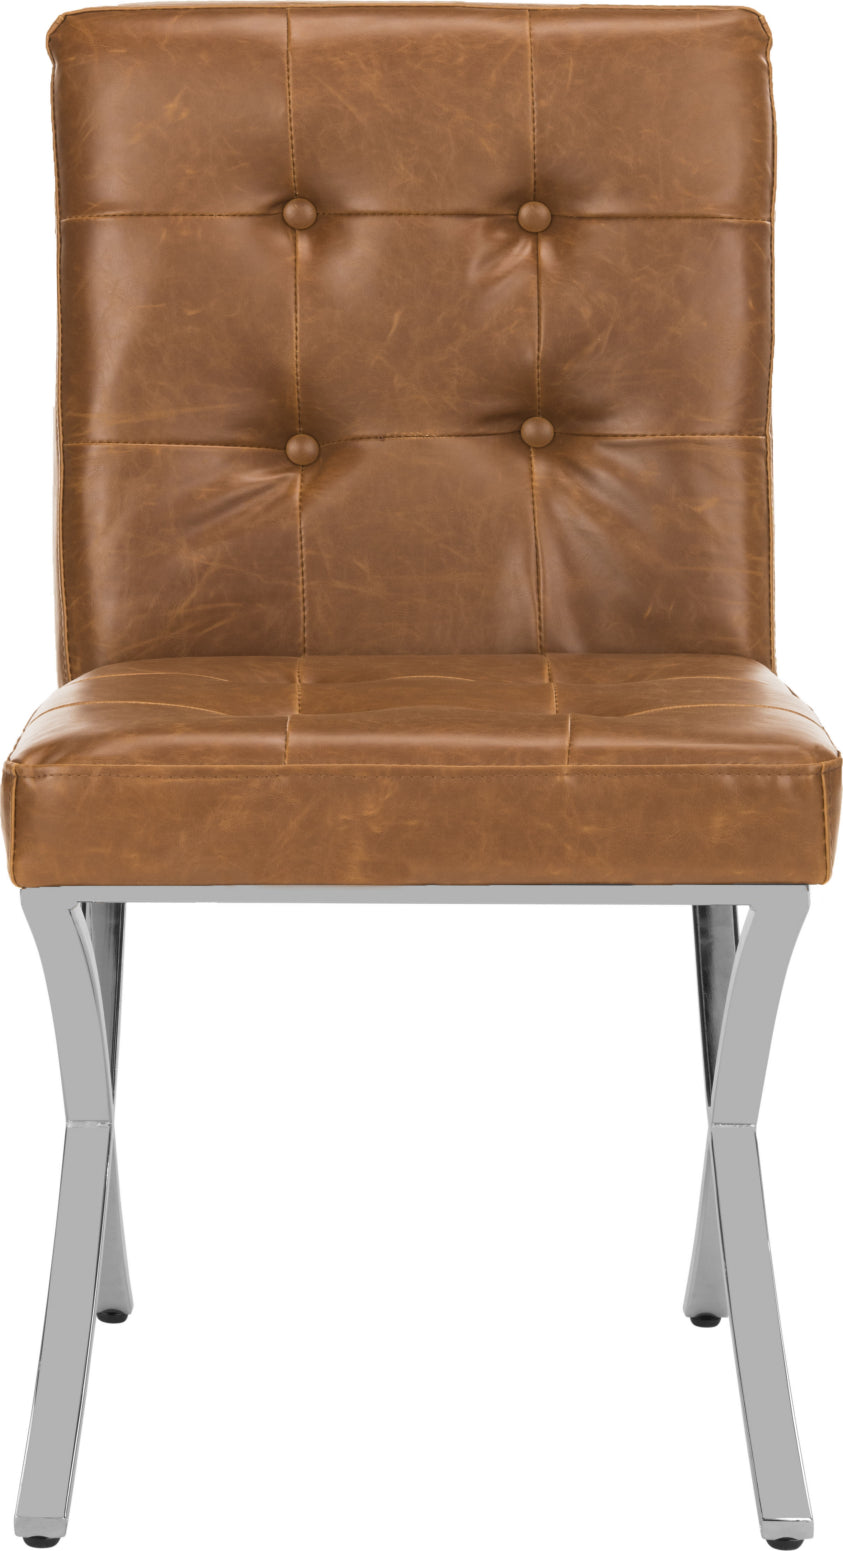 Safavieh Walsh Tufted Side Chair Light Brown and Chrome Furniture main image